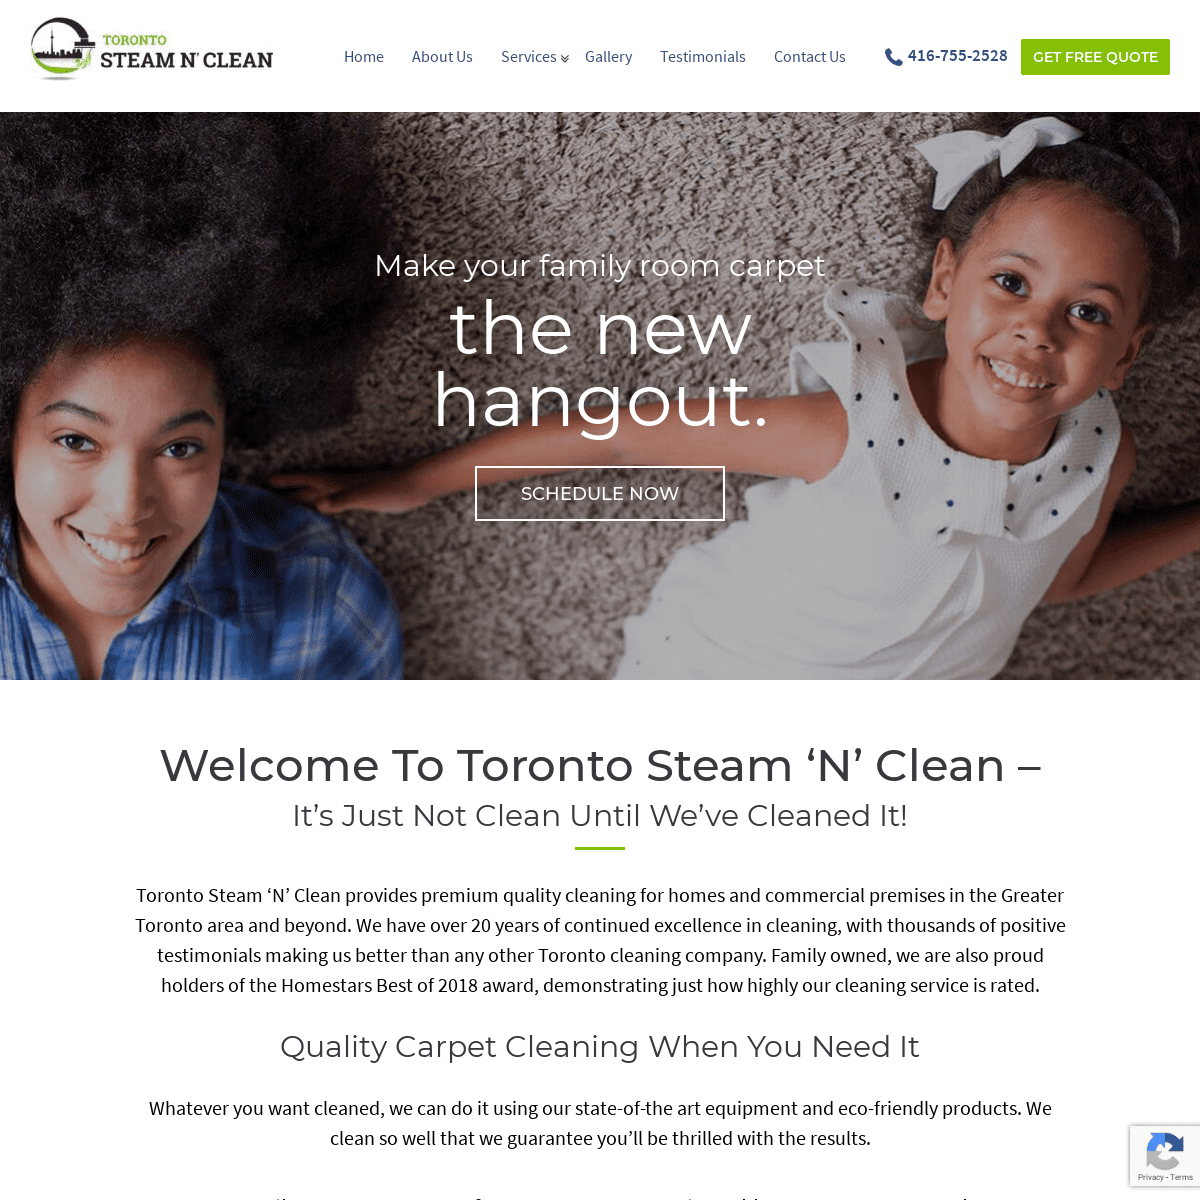 Carpet, Rug & Upholstery Cleaning Services - Toronto Steam N' Clean